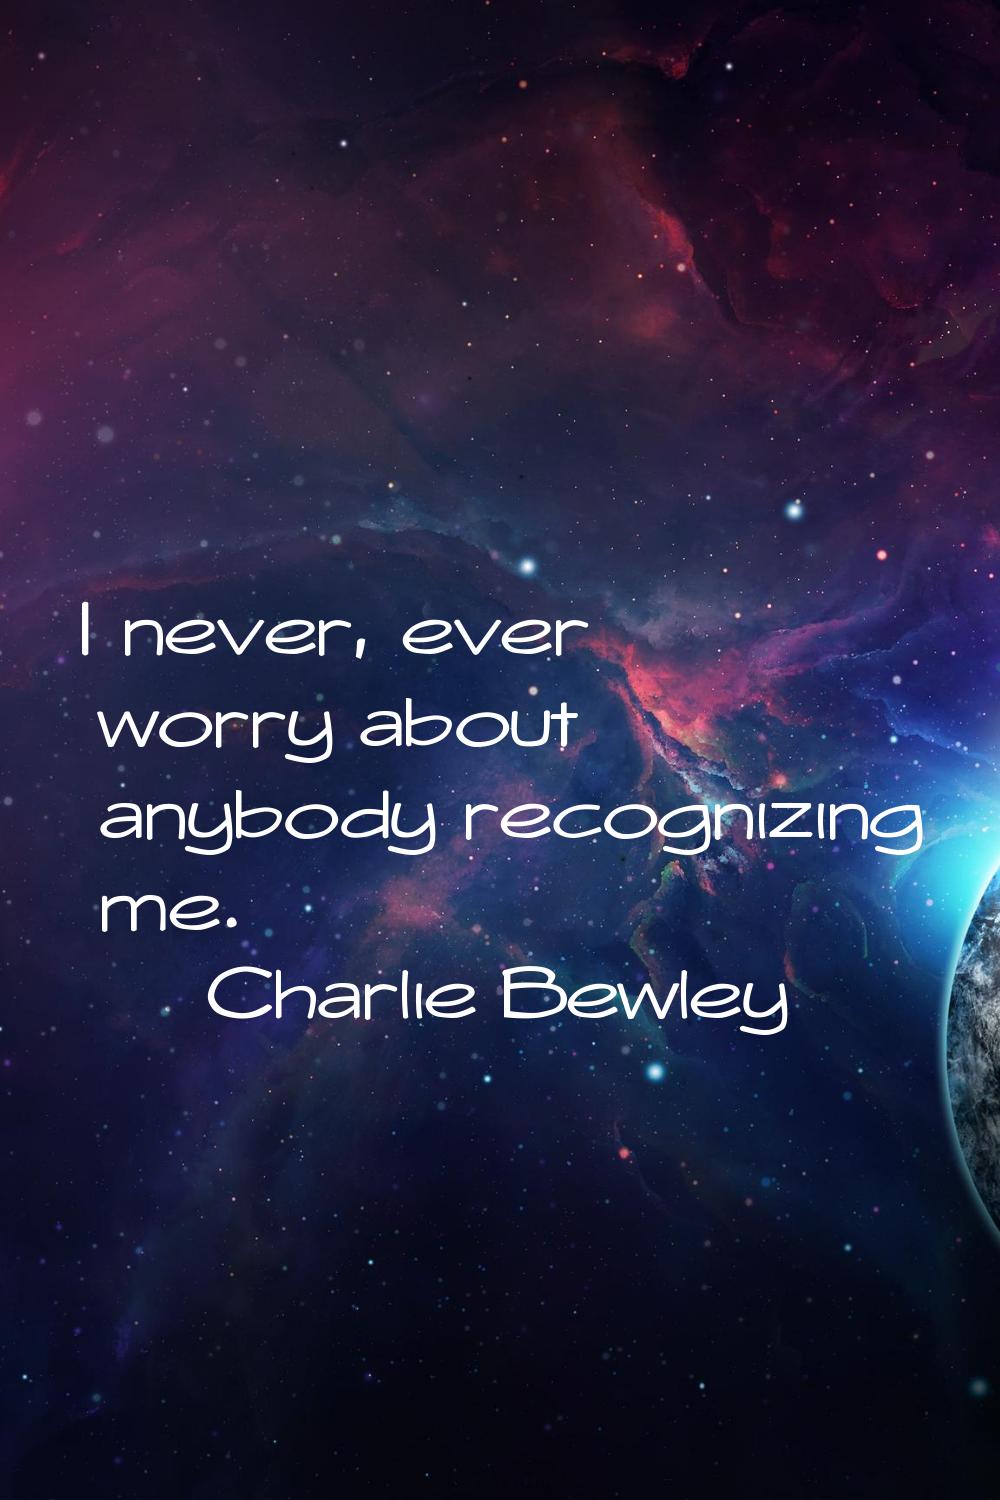 I never, ever worry about anybody recognizing me.